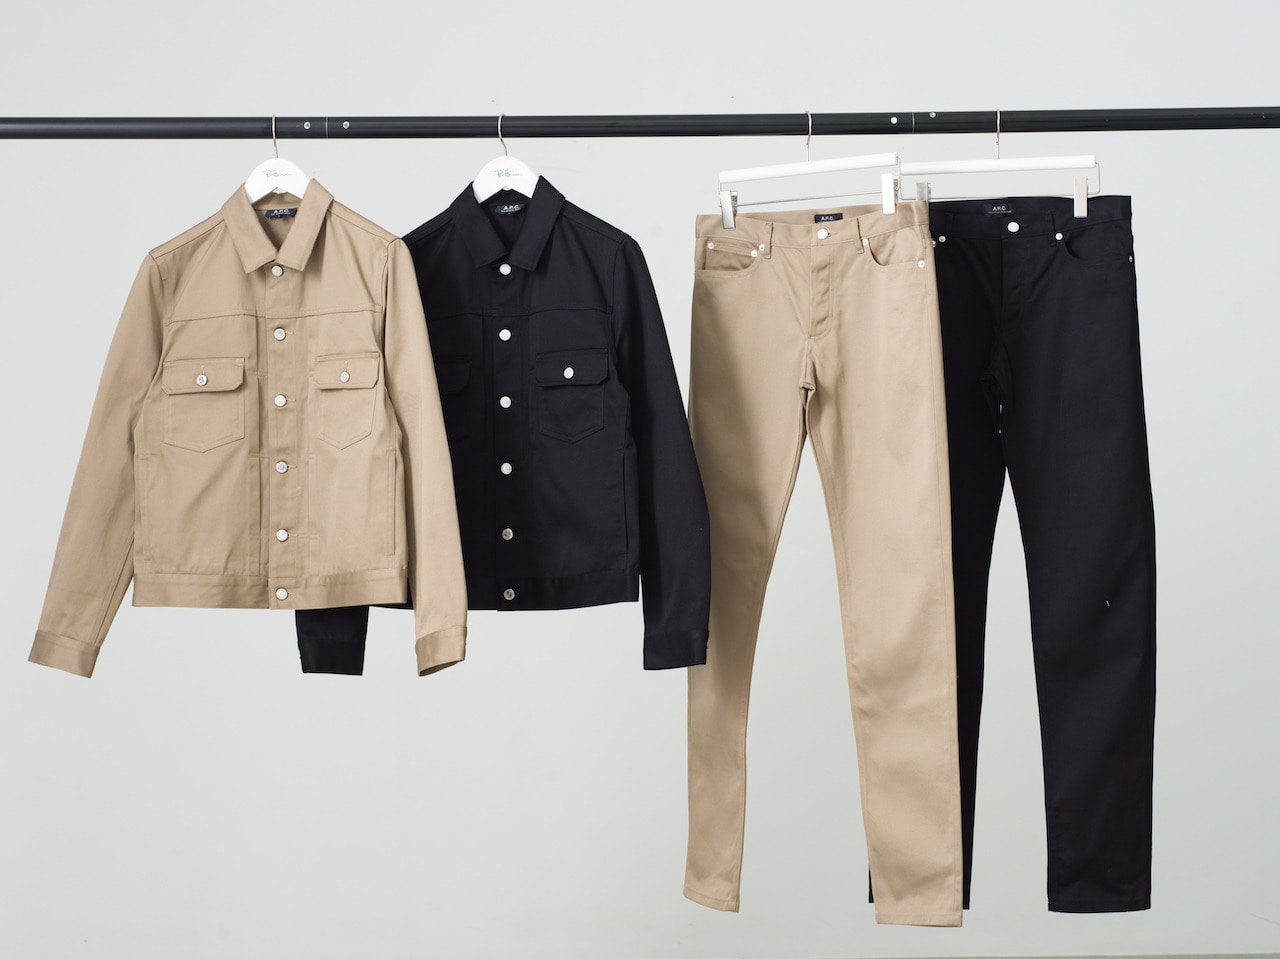 A.P.C. for Ron Herman Jacket ＆ Pants 3.13(Sat) New Arrival News